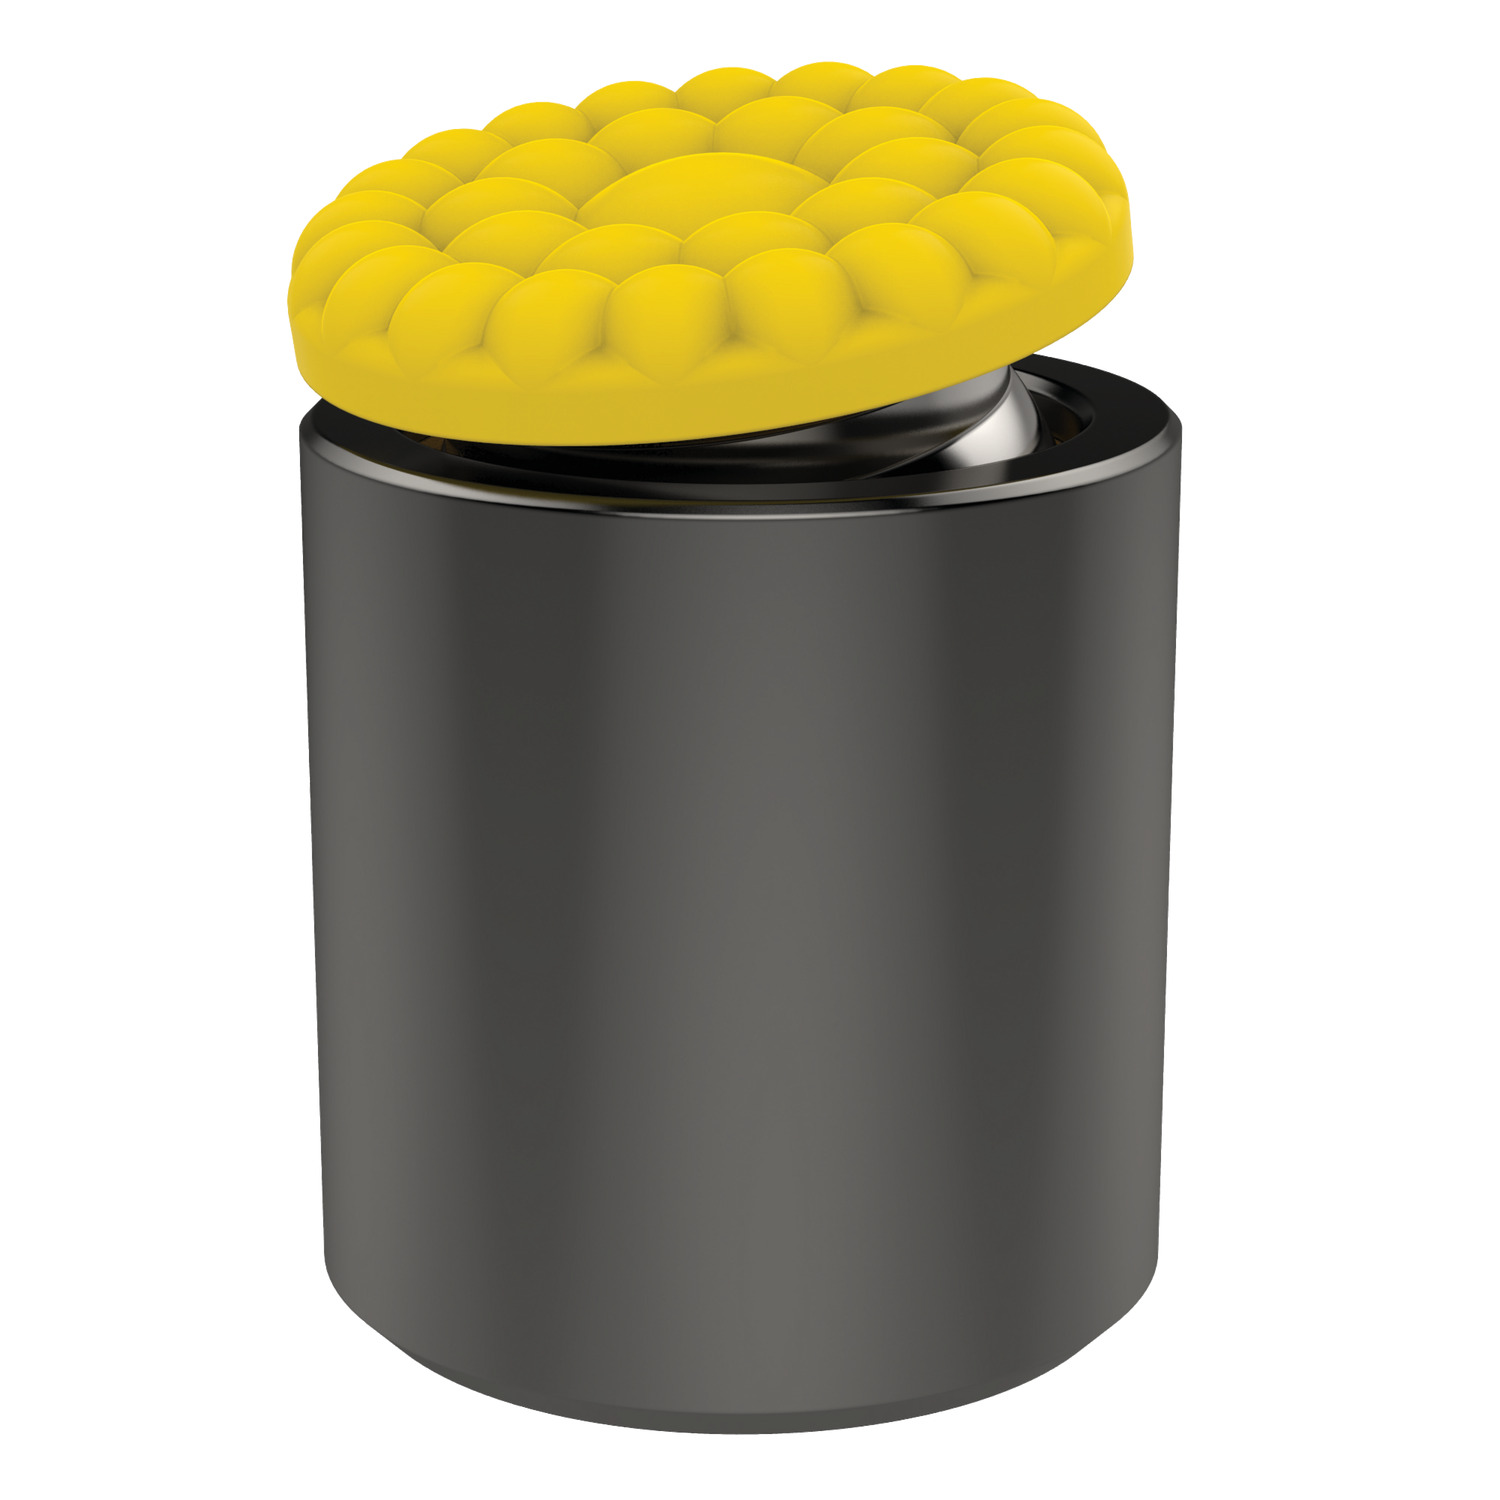 Product 35622, Grippers - Self Aligning urethane coated - female threaded housing / 